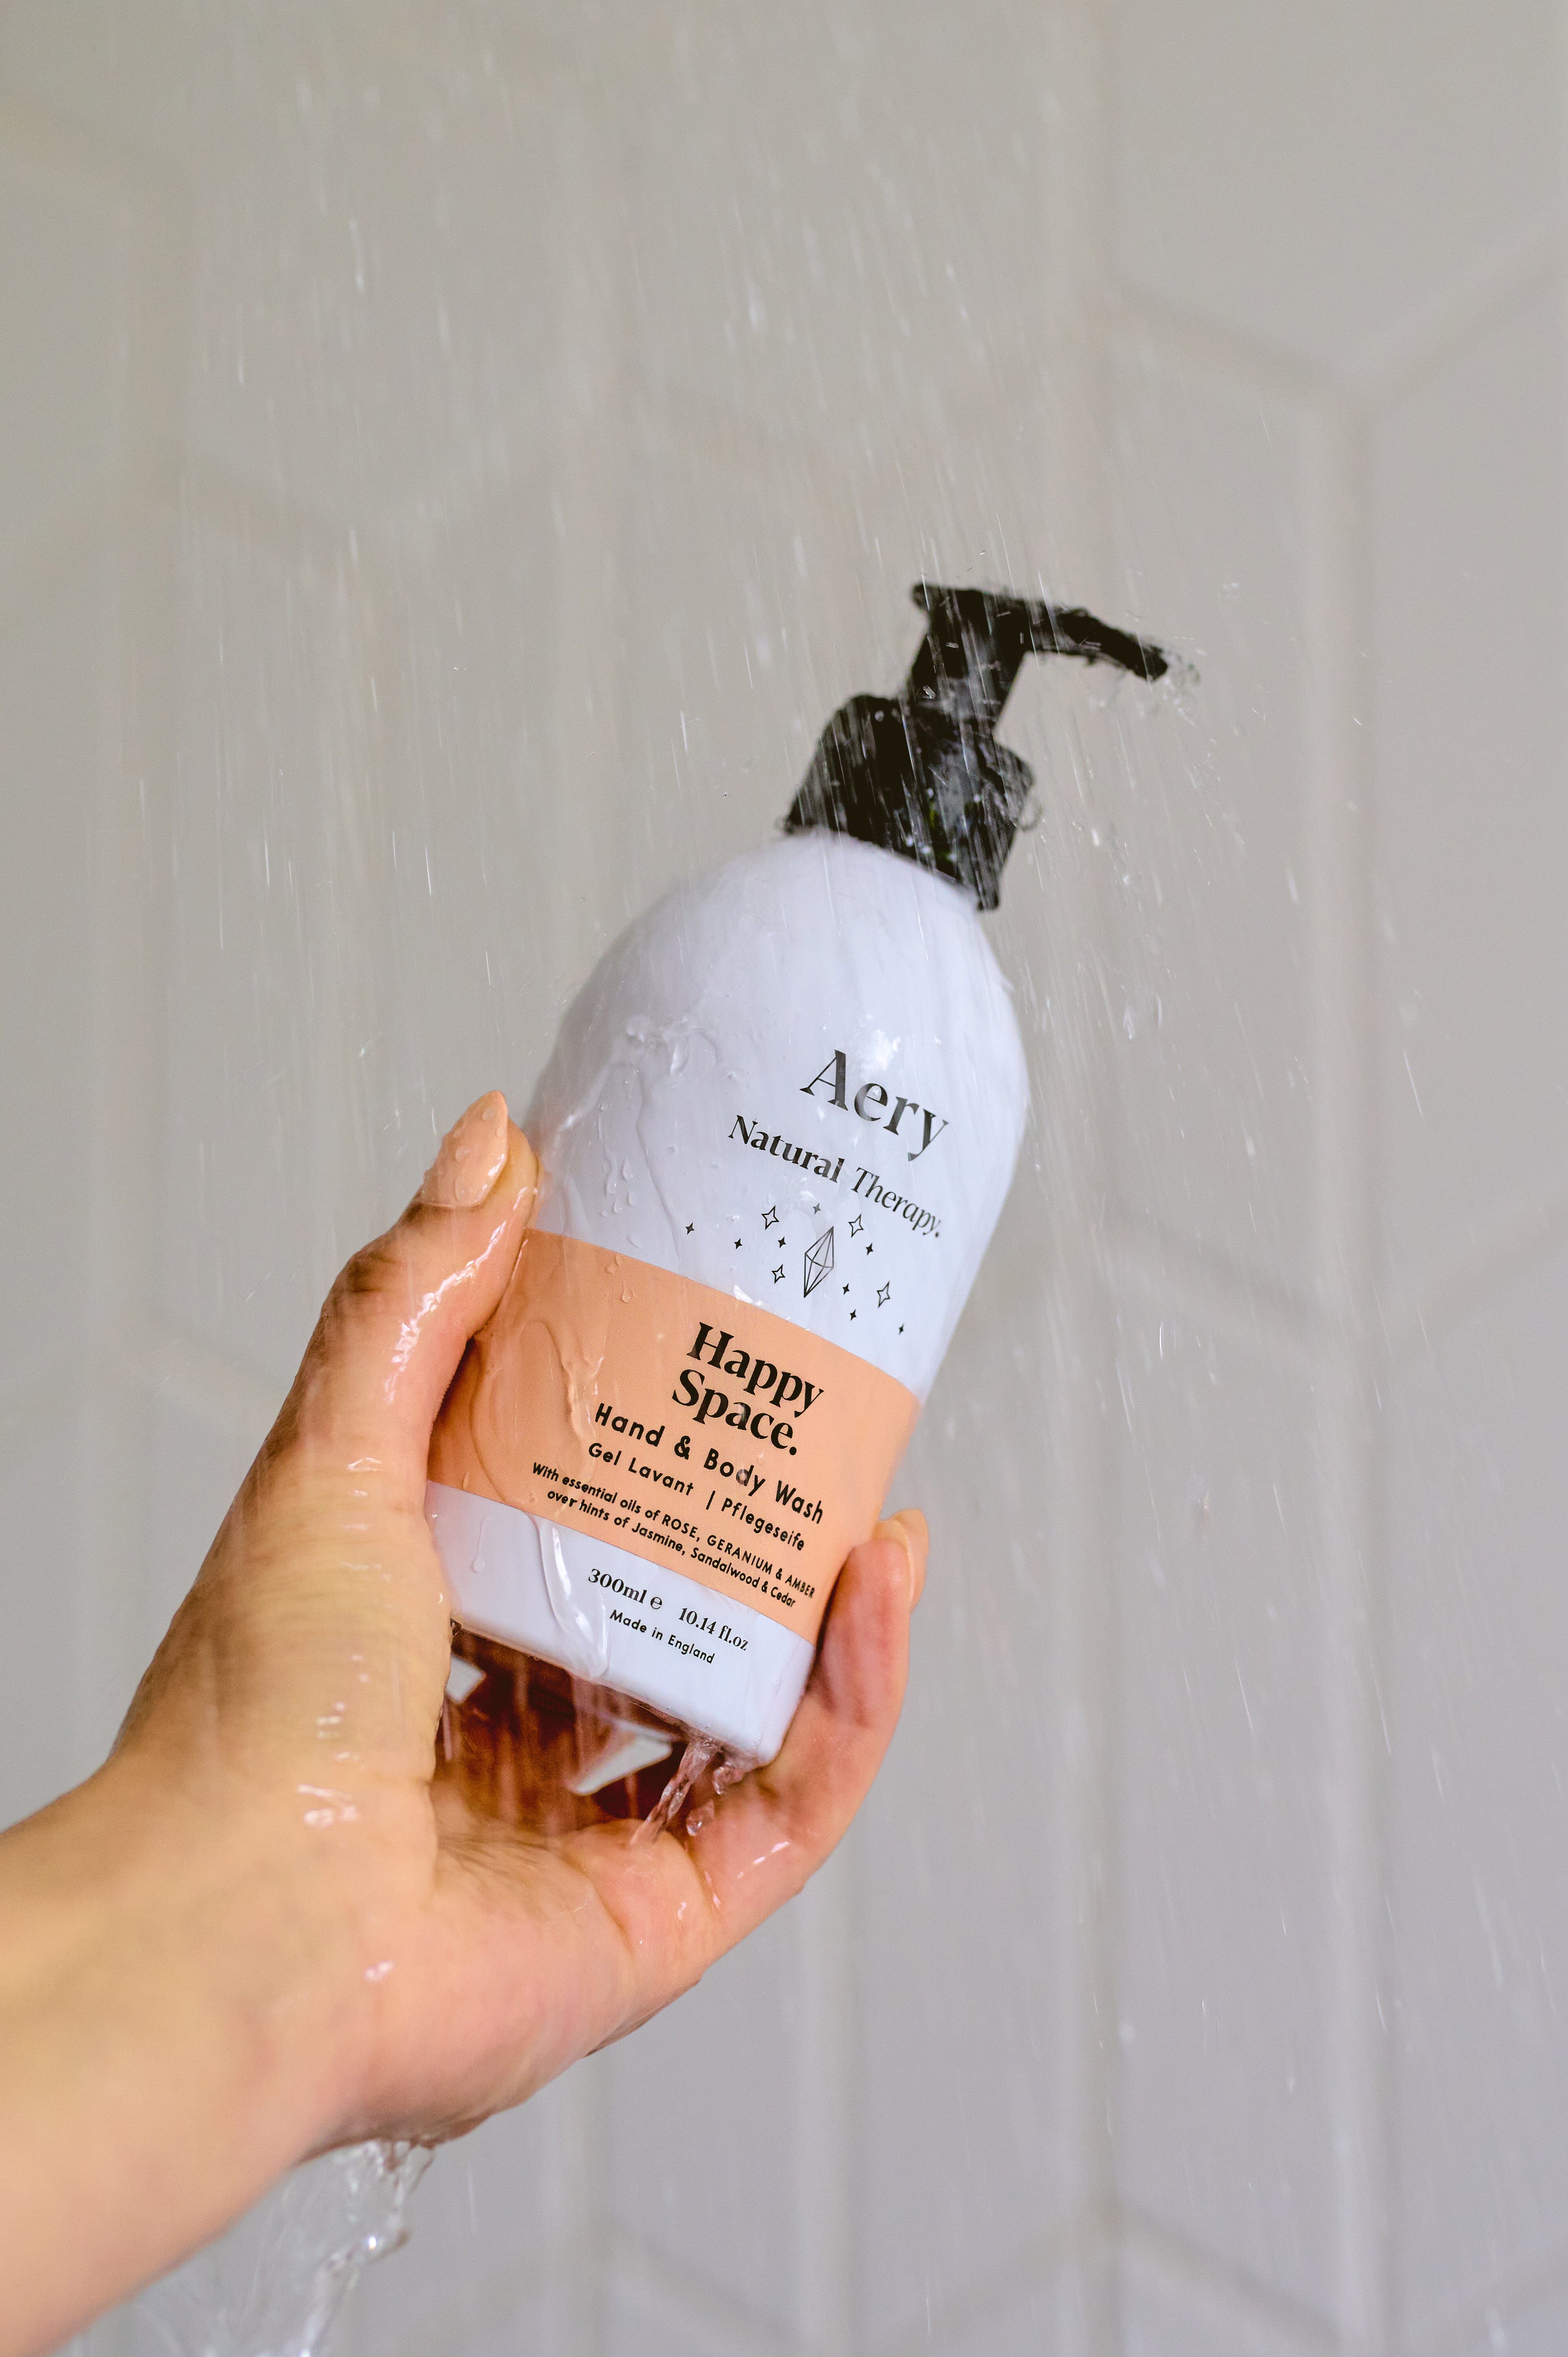 Pink Happy Space hand and body wash by Aery displayed in hand in shower 